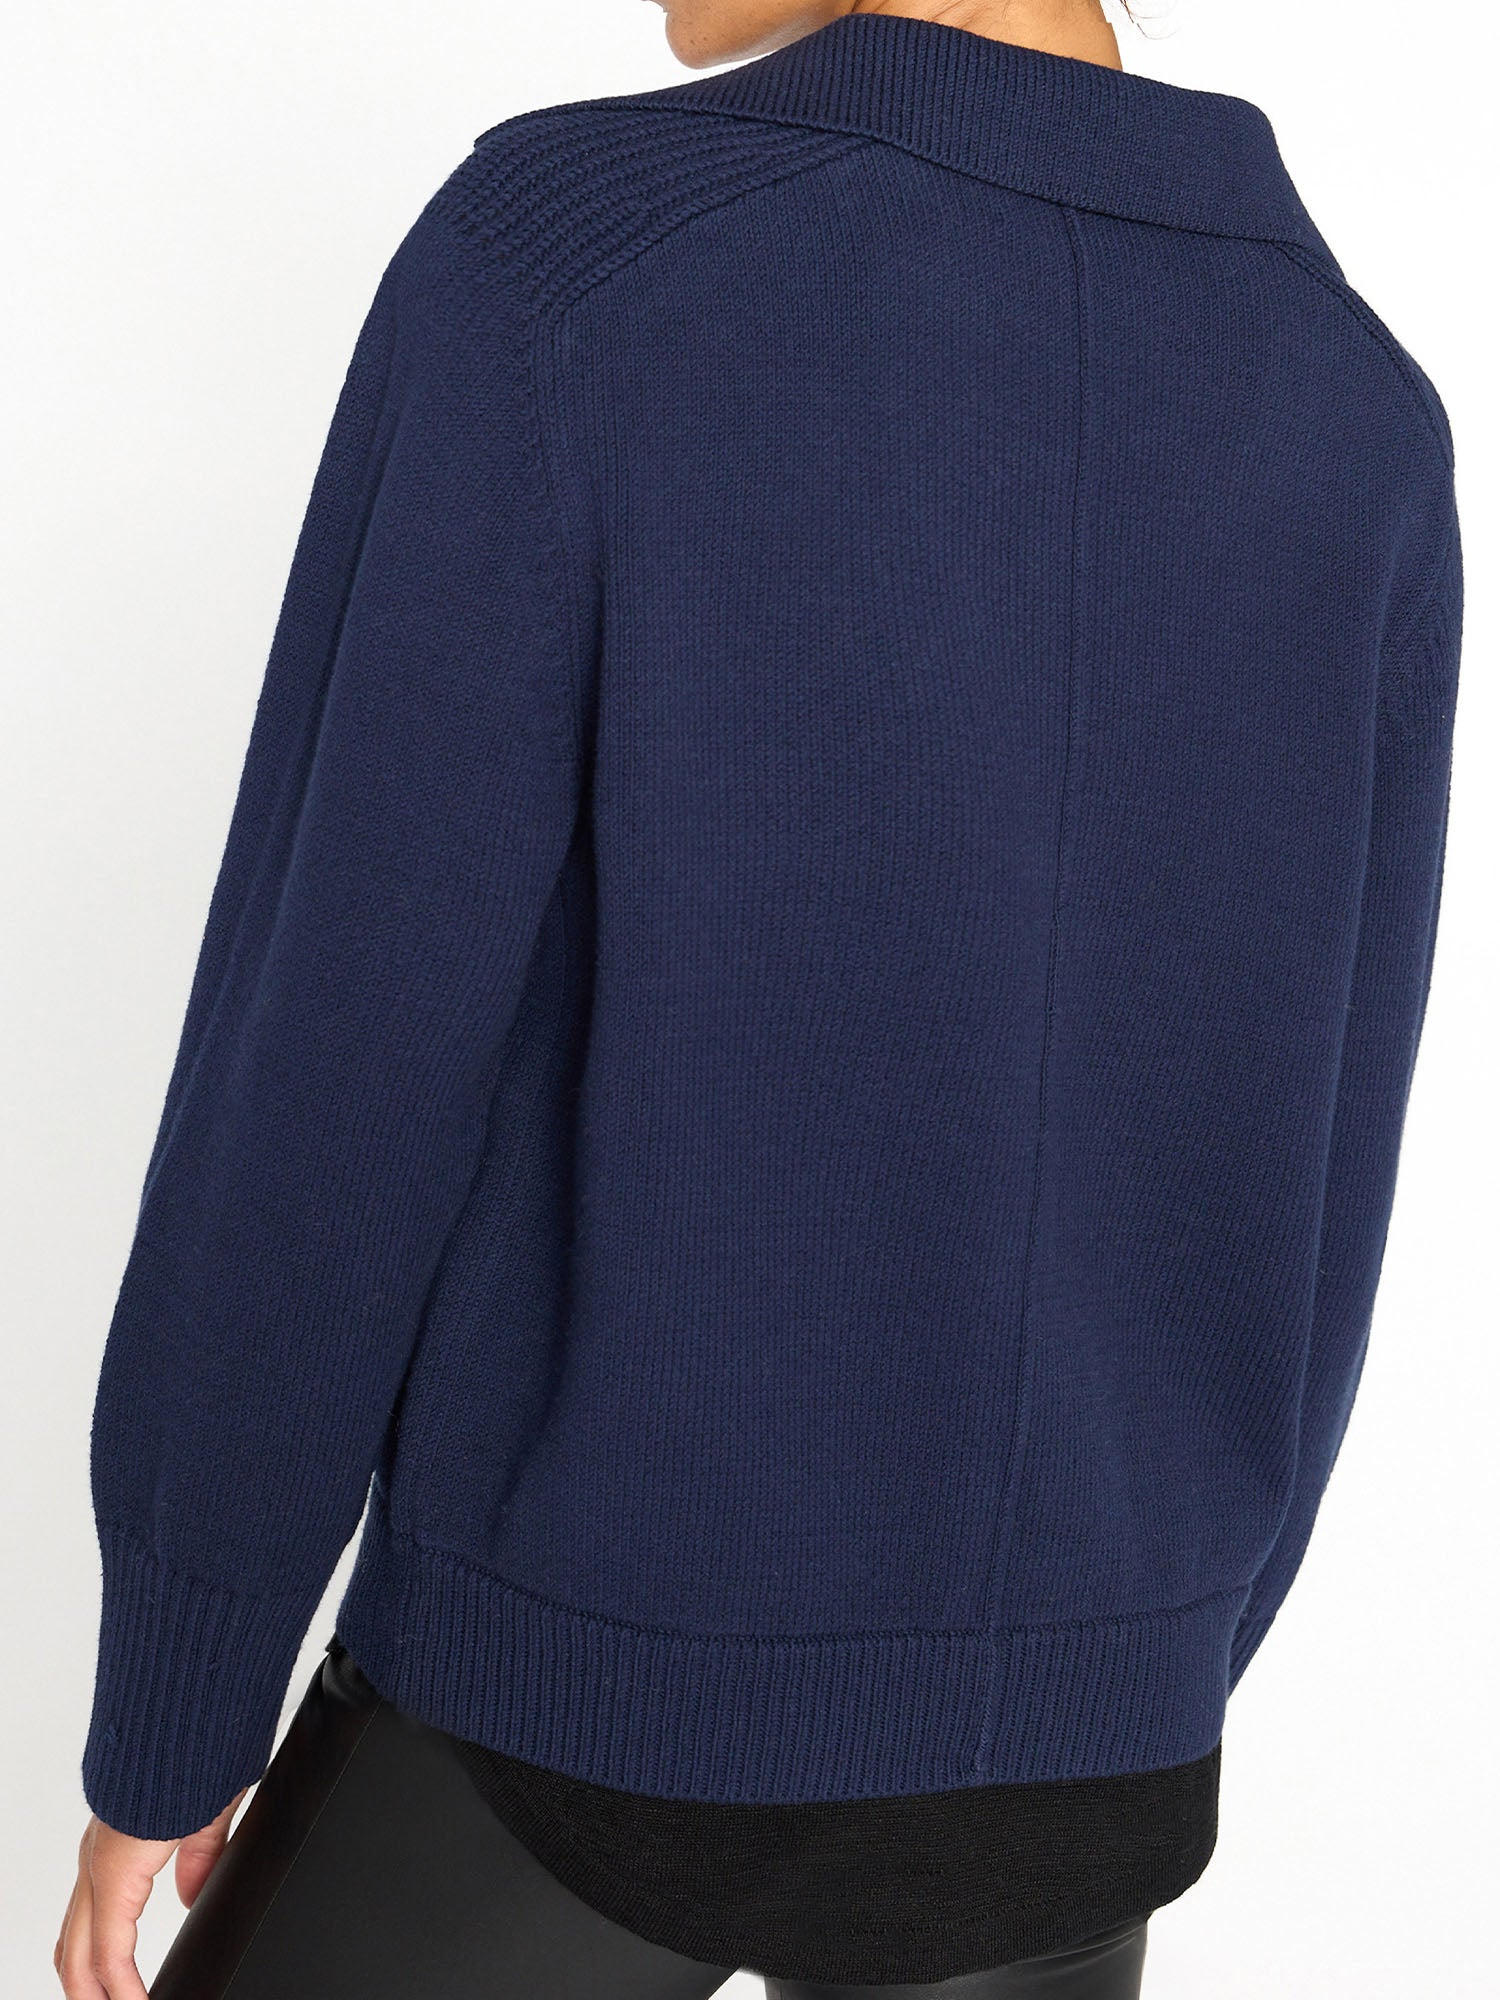 Rainer navy layered polo sweater back view